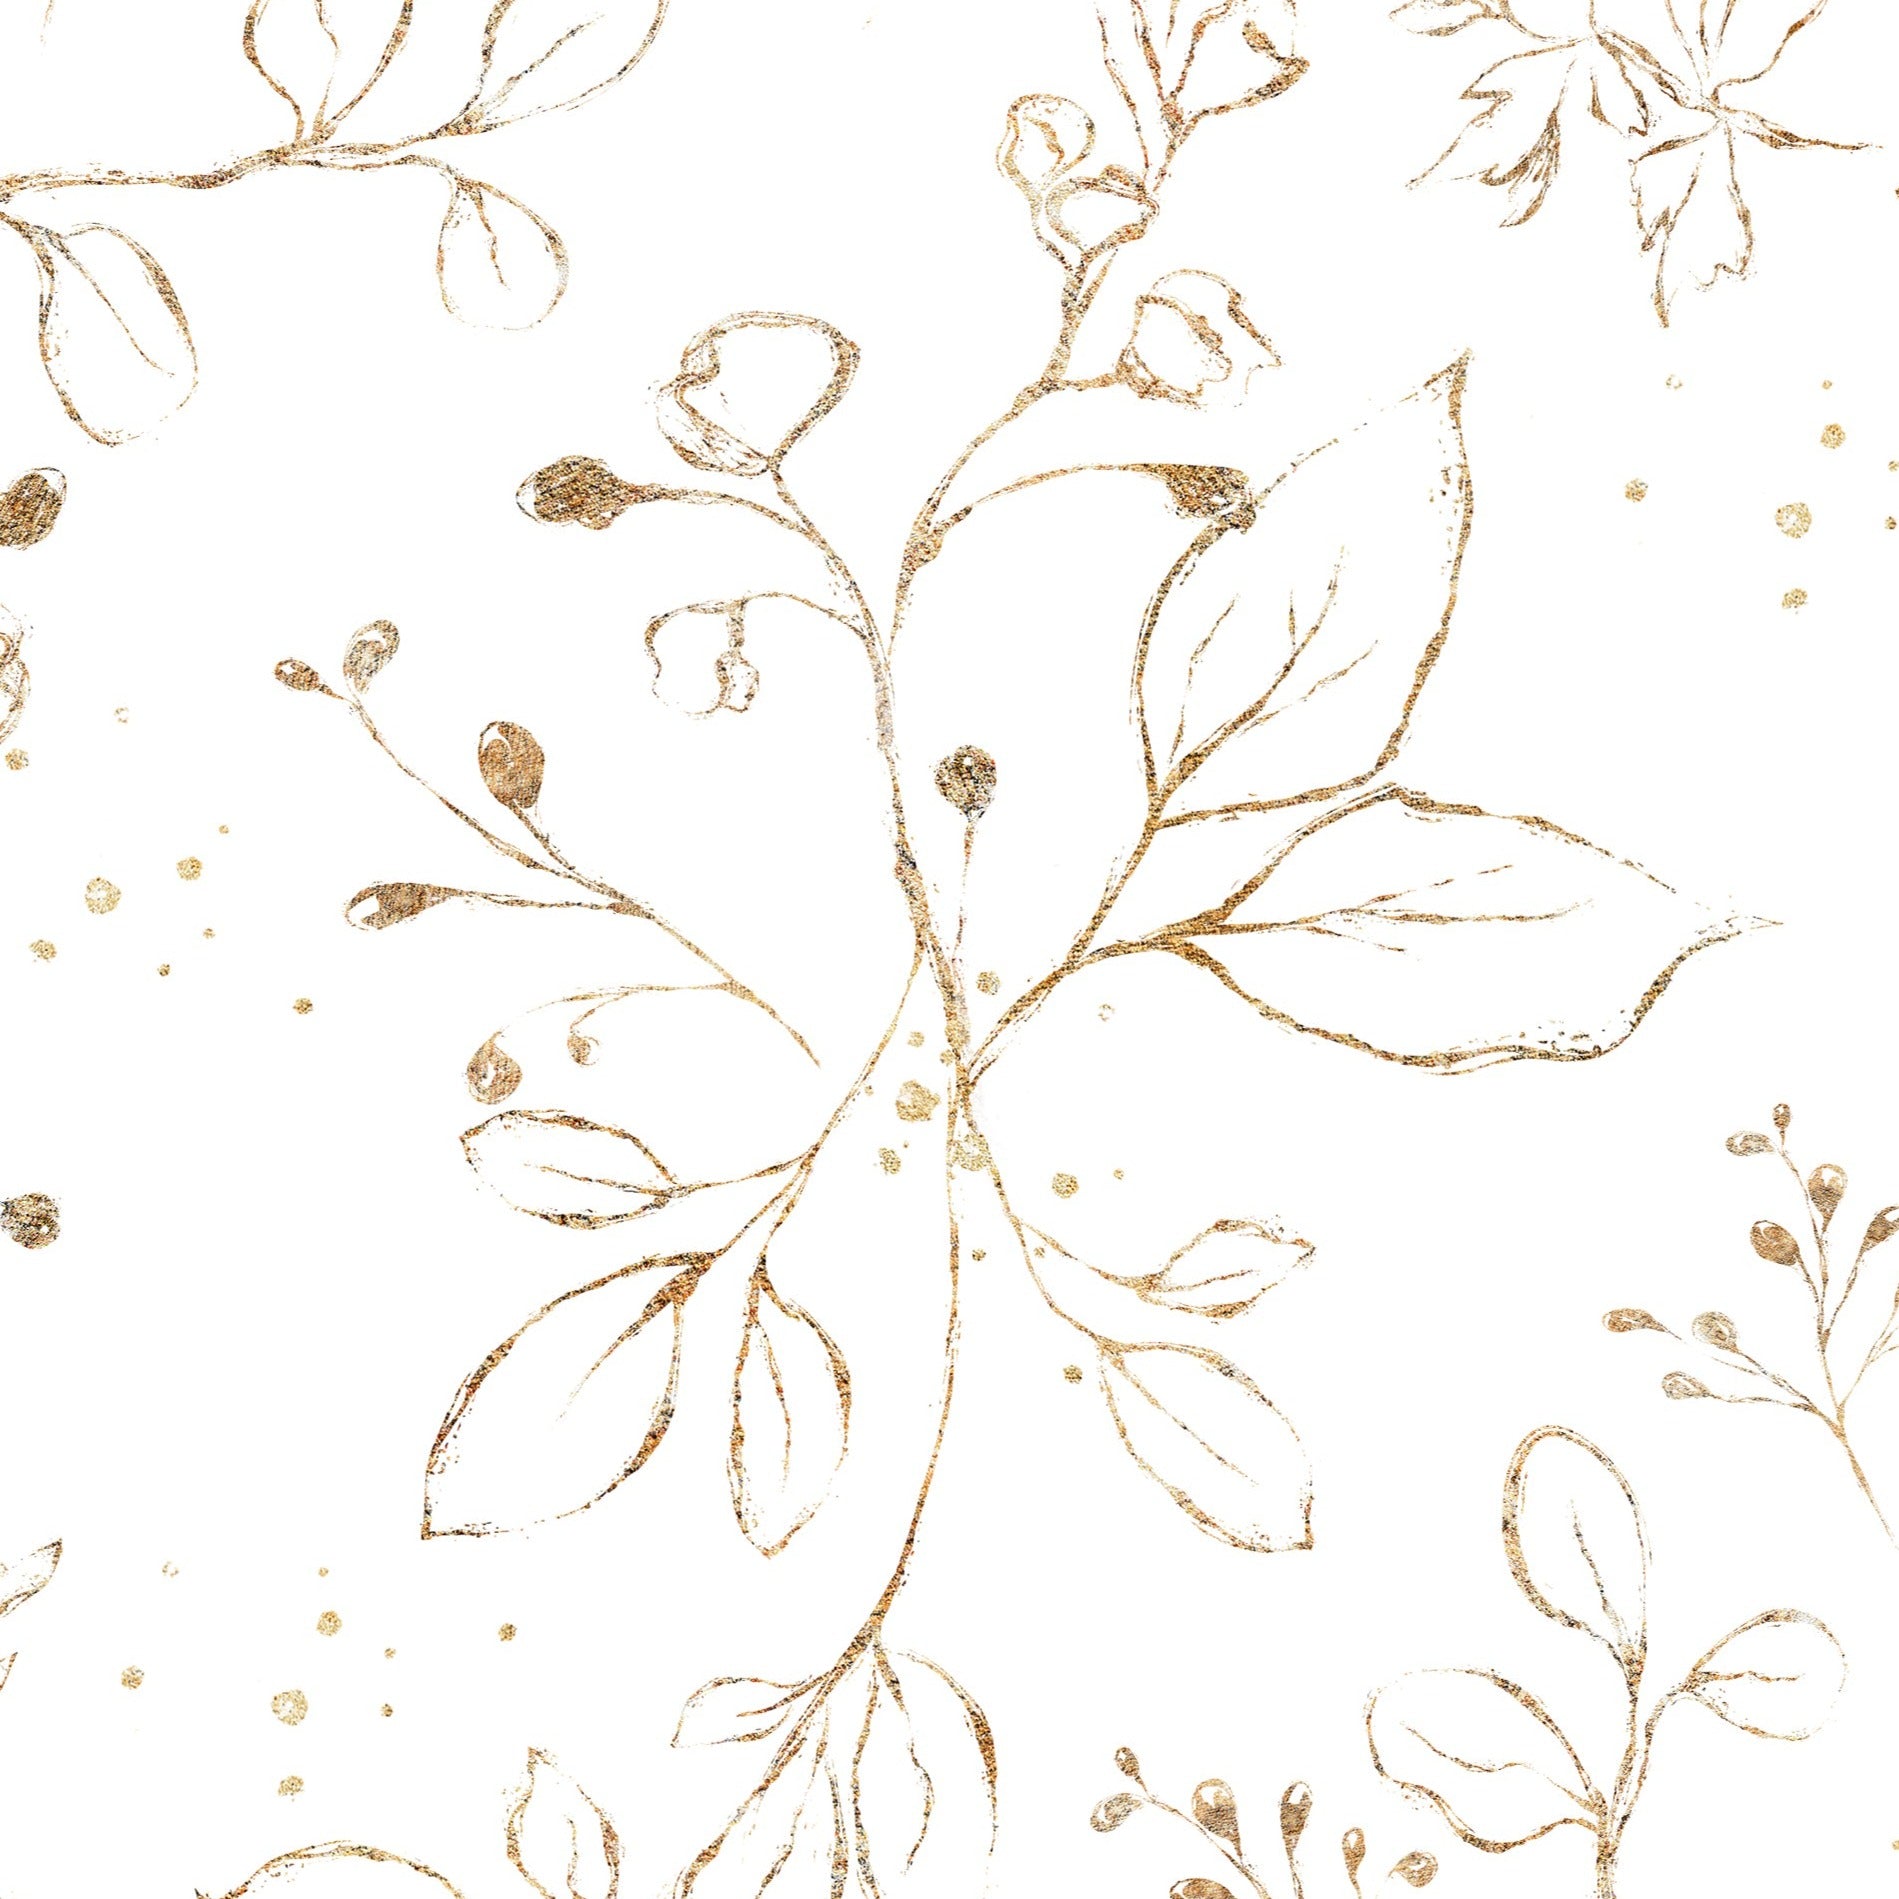 A seamless pattern of Gold Leaves Wallpaper, illustrating the intricate watercolor leaves and berries in gold, casting a luxurious and warm ambiance in any room it adorns